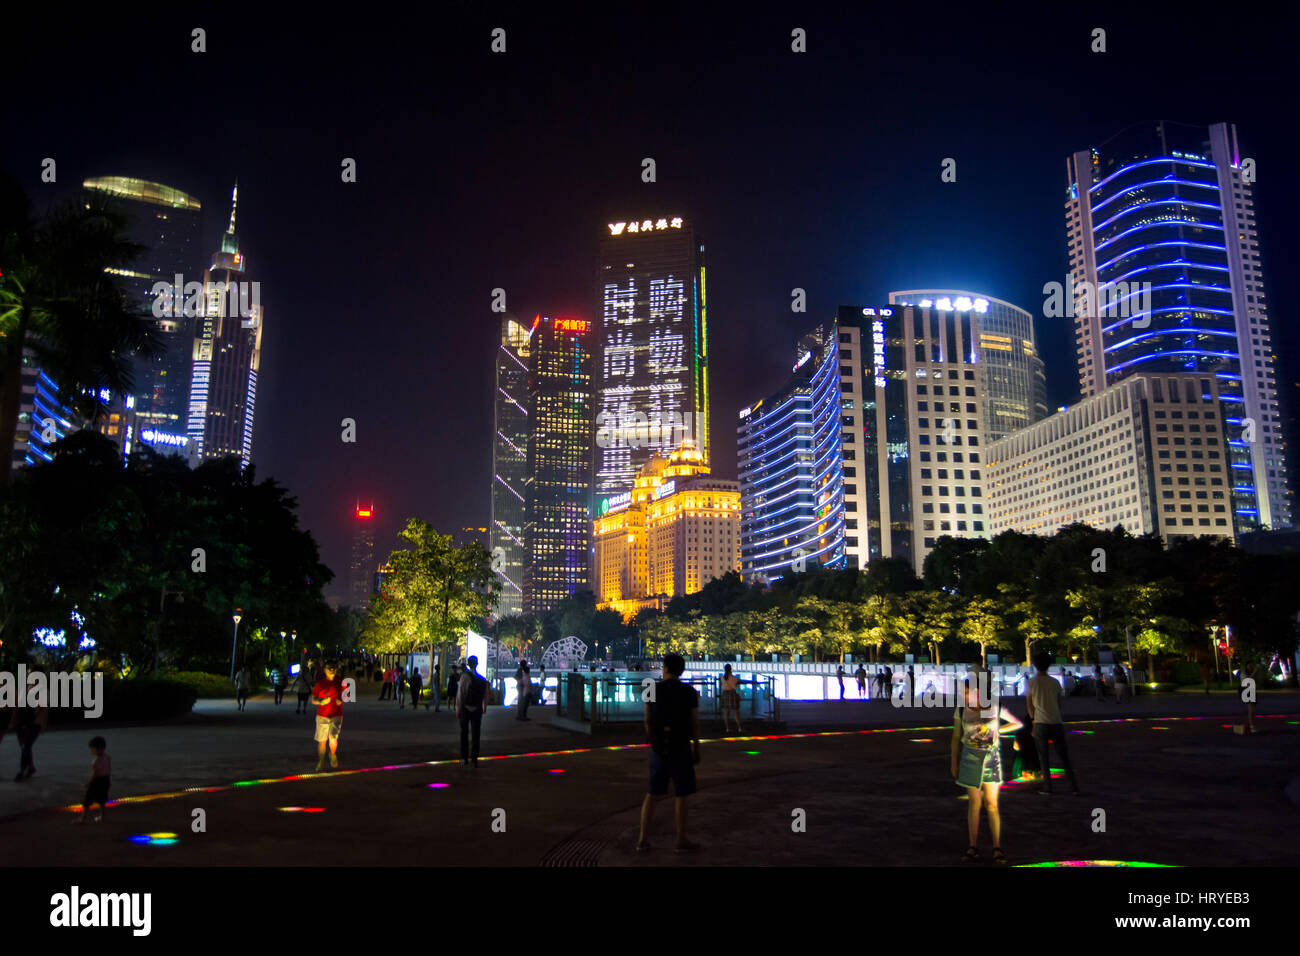 GUANGZHOU, CHINA - SEPTEMBER 13, 2016: Guangzhou modern central city district with people walking in illuminated path, night view Stock Photo